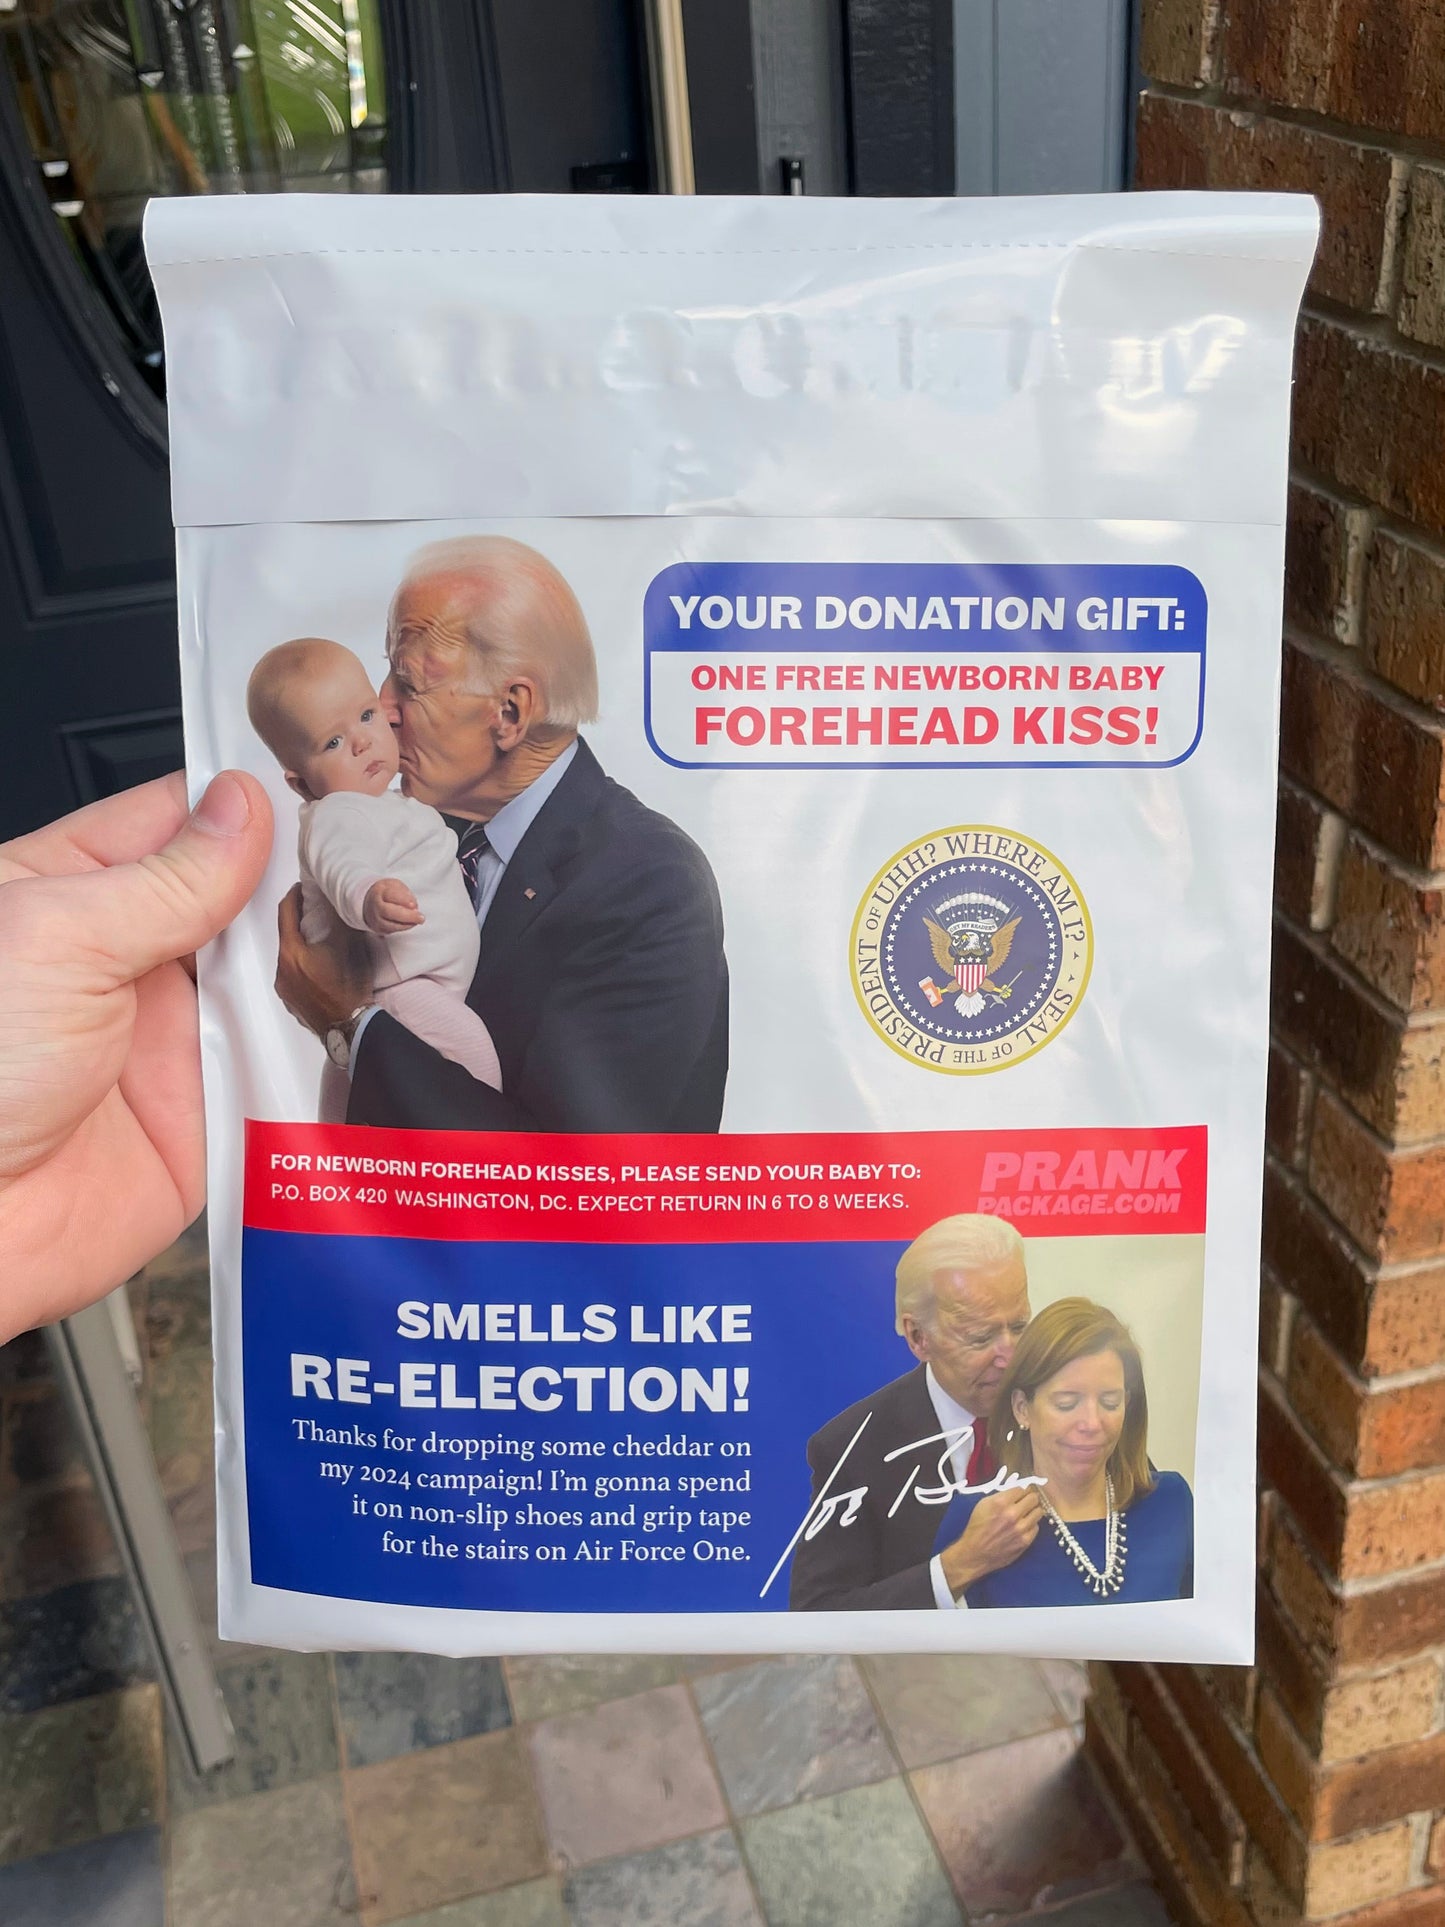 POV of someone reading the back of the "Joe Biden B-Anon Donation Confirmation" prank mailer. Featuring hysterical text that pokes fun at Joe Biden.